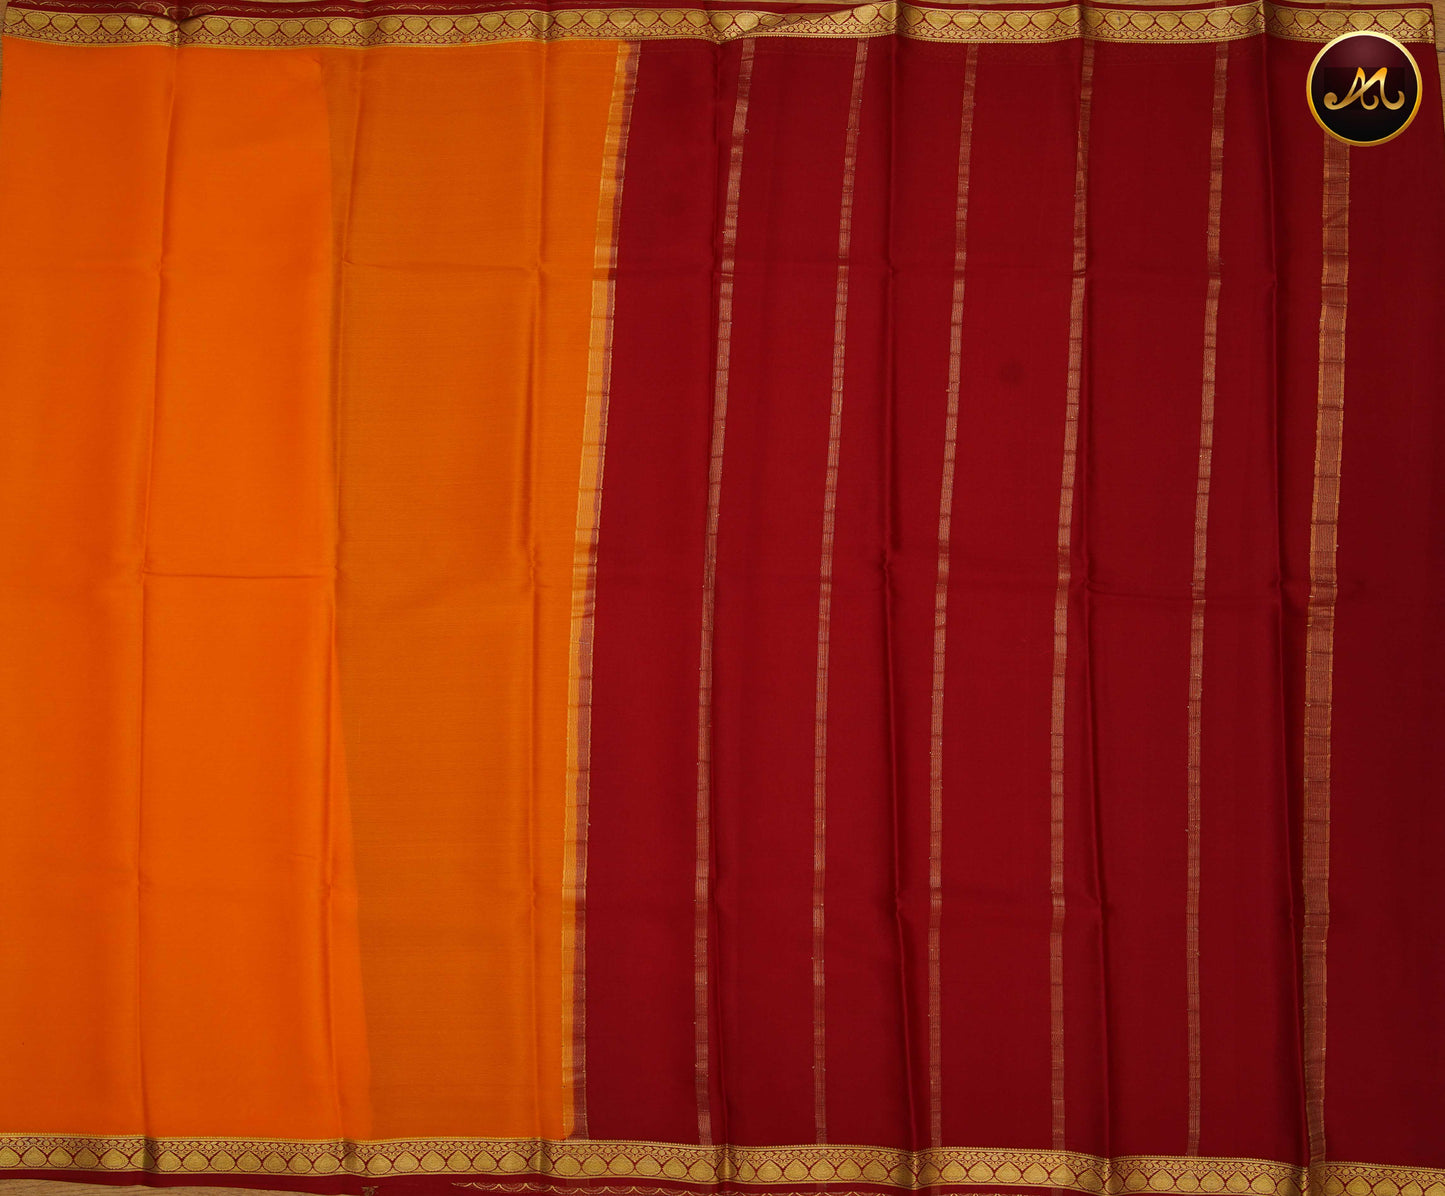 Mysore Crepe Silk saree with KSIC finish in Mango yellow and Red combination with Gold Zari Border and Chit  Pallu